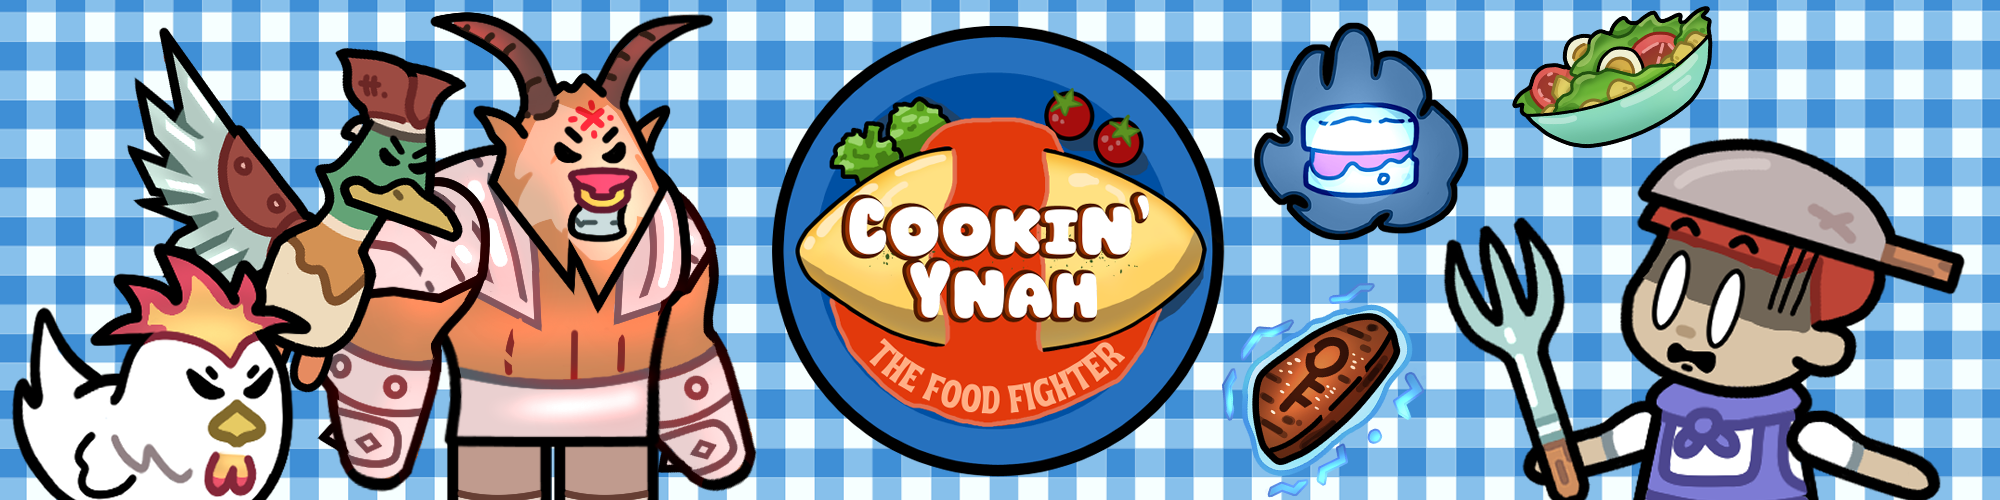 Cookin' Ynah: The Food Fighter